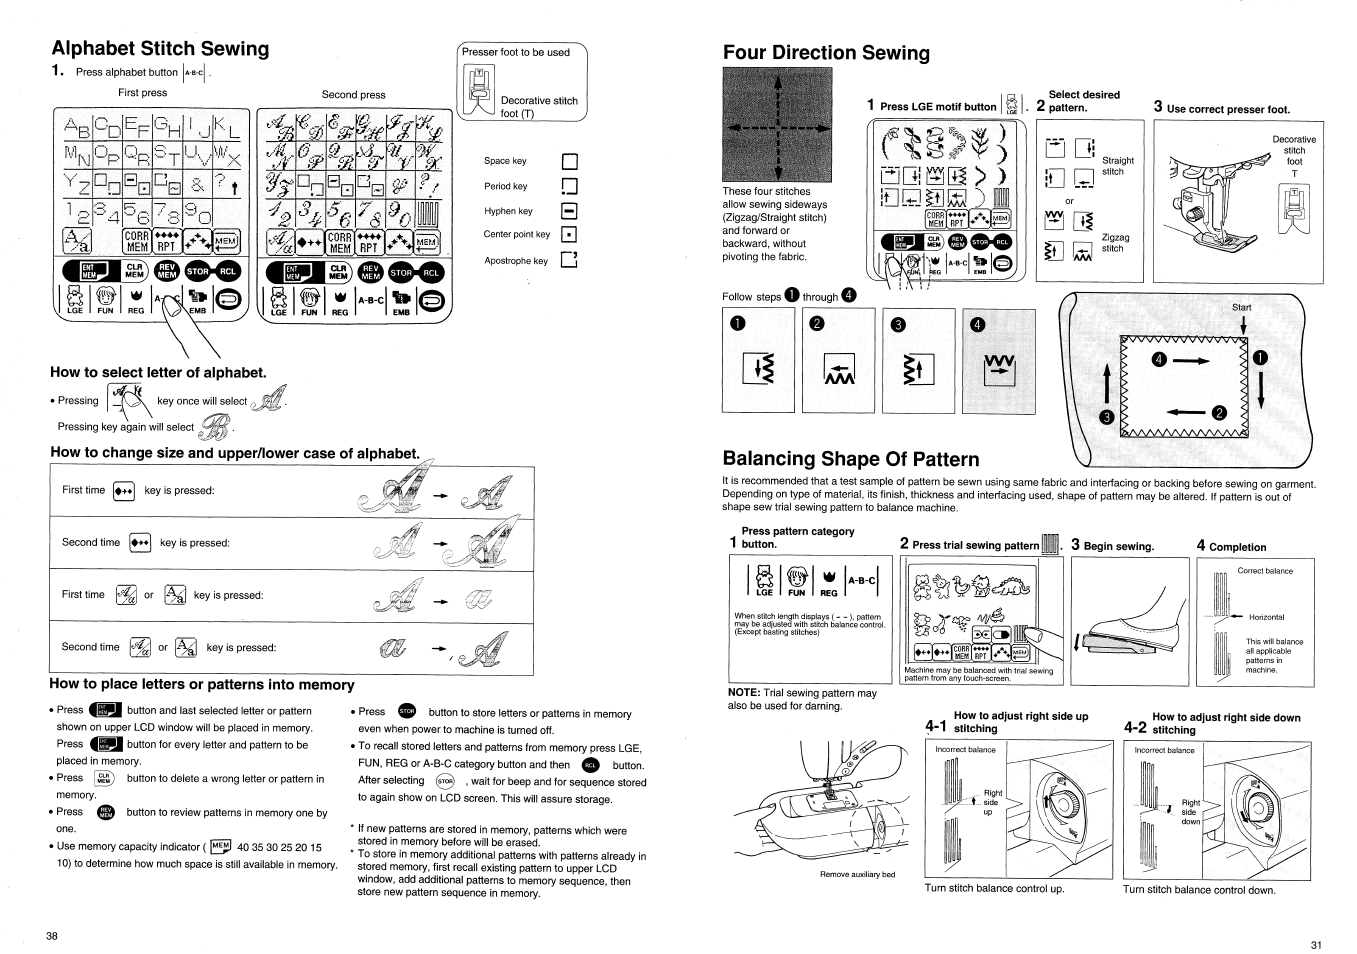 Alphabet stitch sewing, How to select letter of alphabet, How to place letters or patterns into memory | M v % % %^0 d a | SINGER XL100 Quantum User Manual | Page 40 / 72